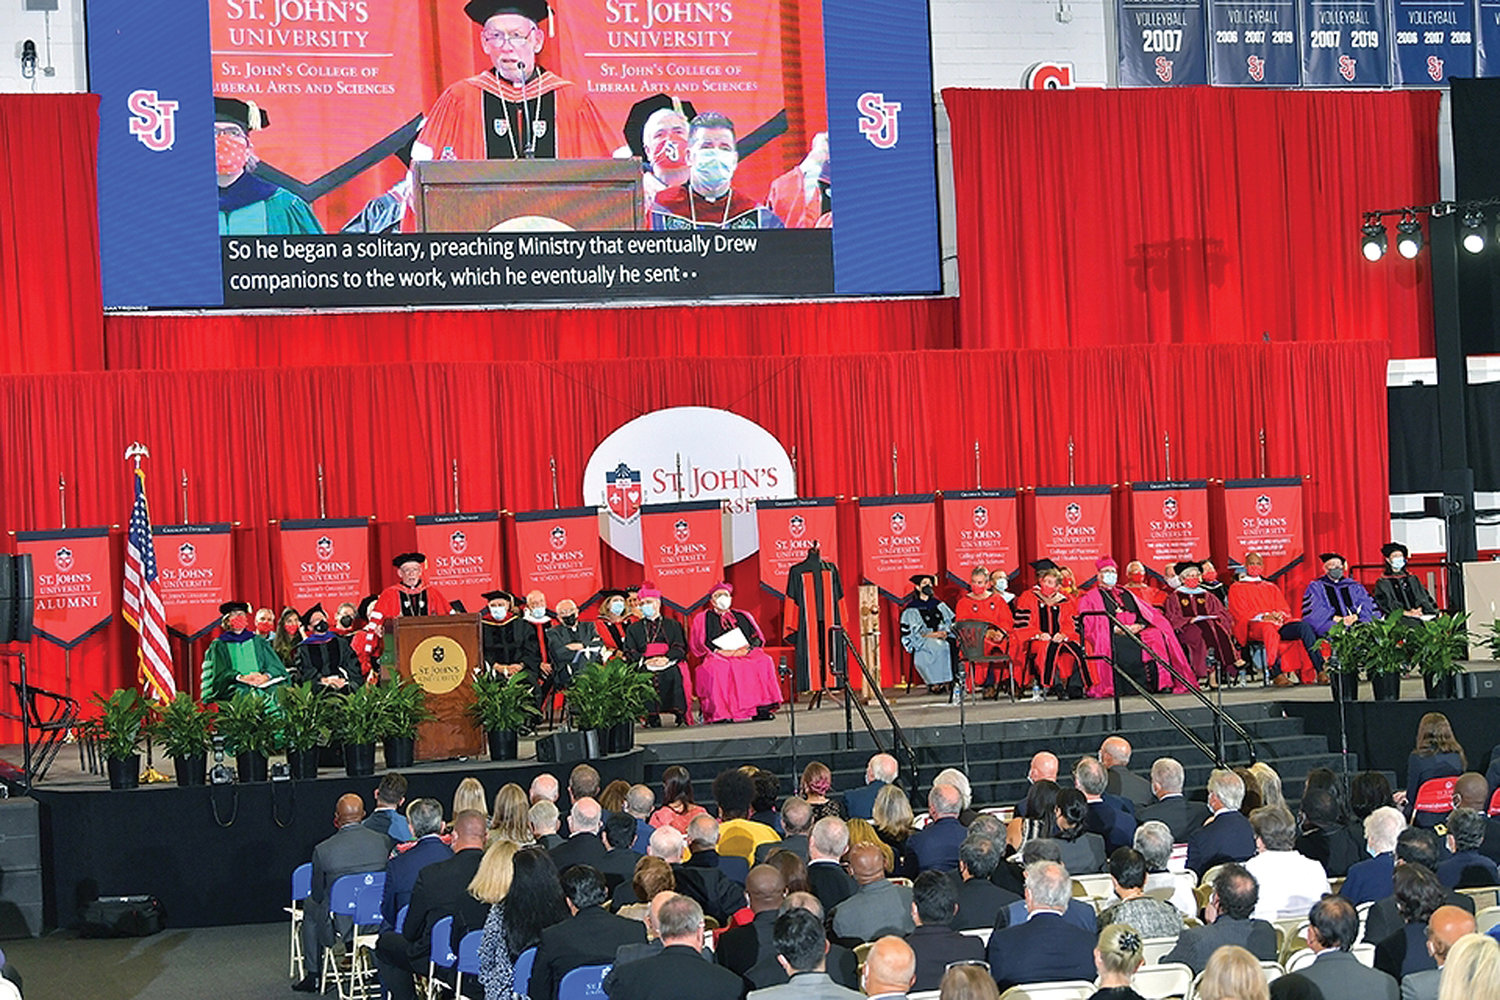 NEW PRESIDENT—Father Brian J. Shanley, O.P., was formally invested as president of St. John’s University during a Sept. 24 ceremony at Carnesecca Arena on the university’s main campus in Queens. His tenure as St. John’s president began Feb. 1. Father Shanley is the 18th president in the Vincentian-run university’s 151-year history. A Dominican priest, he served for 15 years as president of Providence College in Rhode Island before coming to St. John’s.